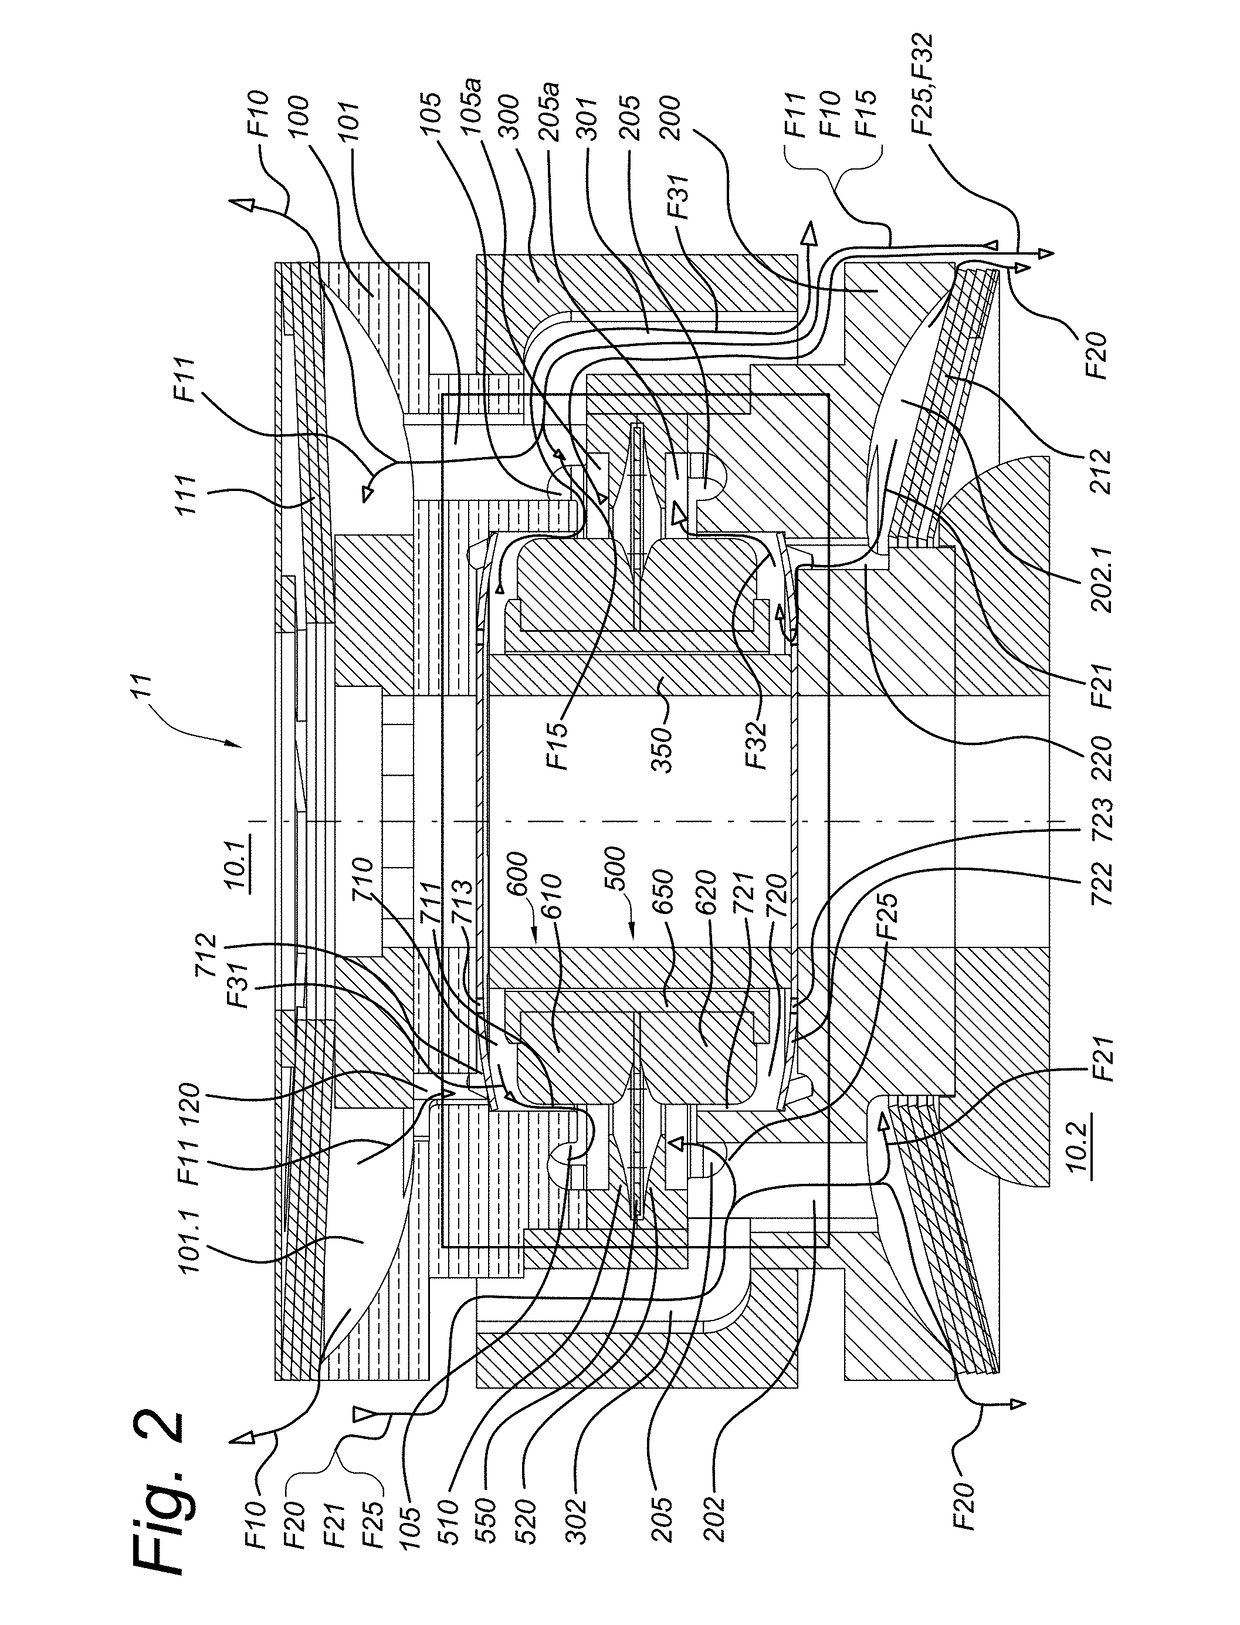 Frequency-selective damper valve, and shock absorber and piston having such valve